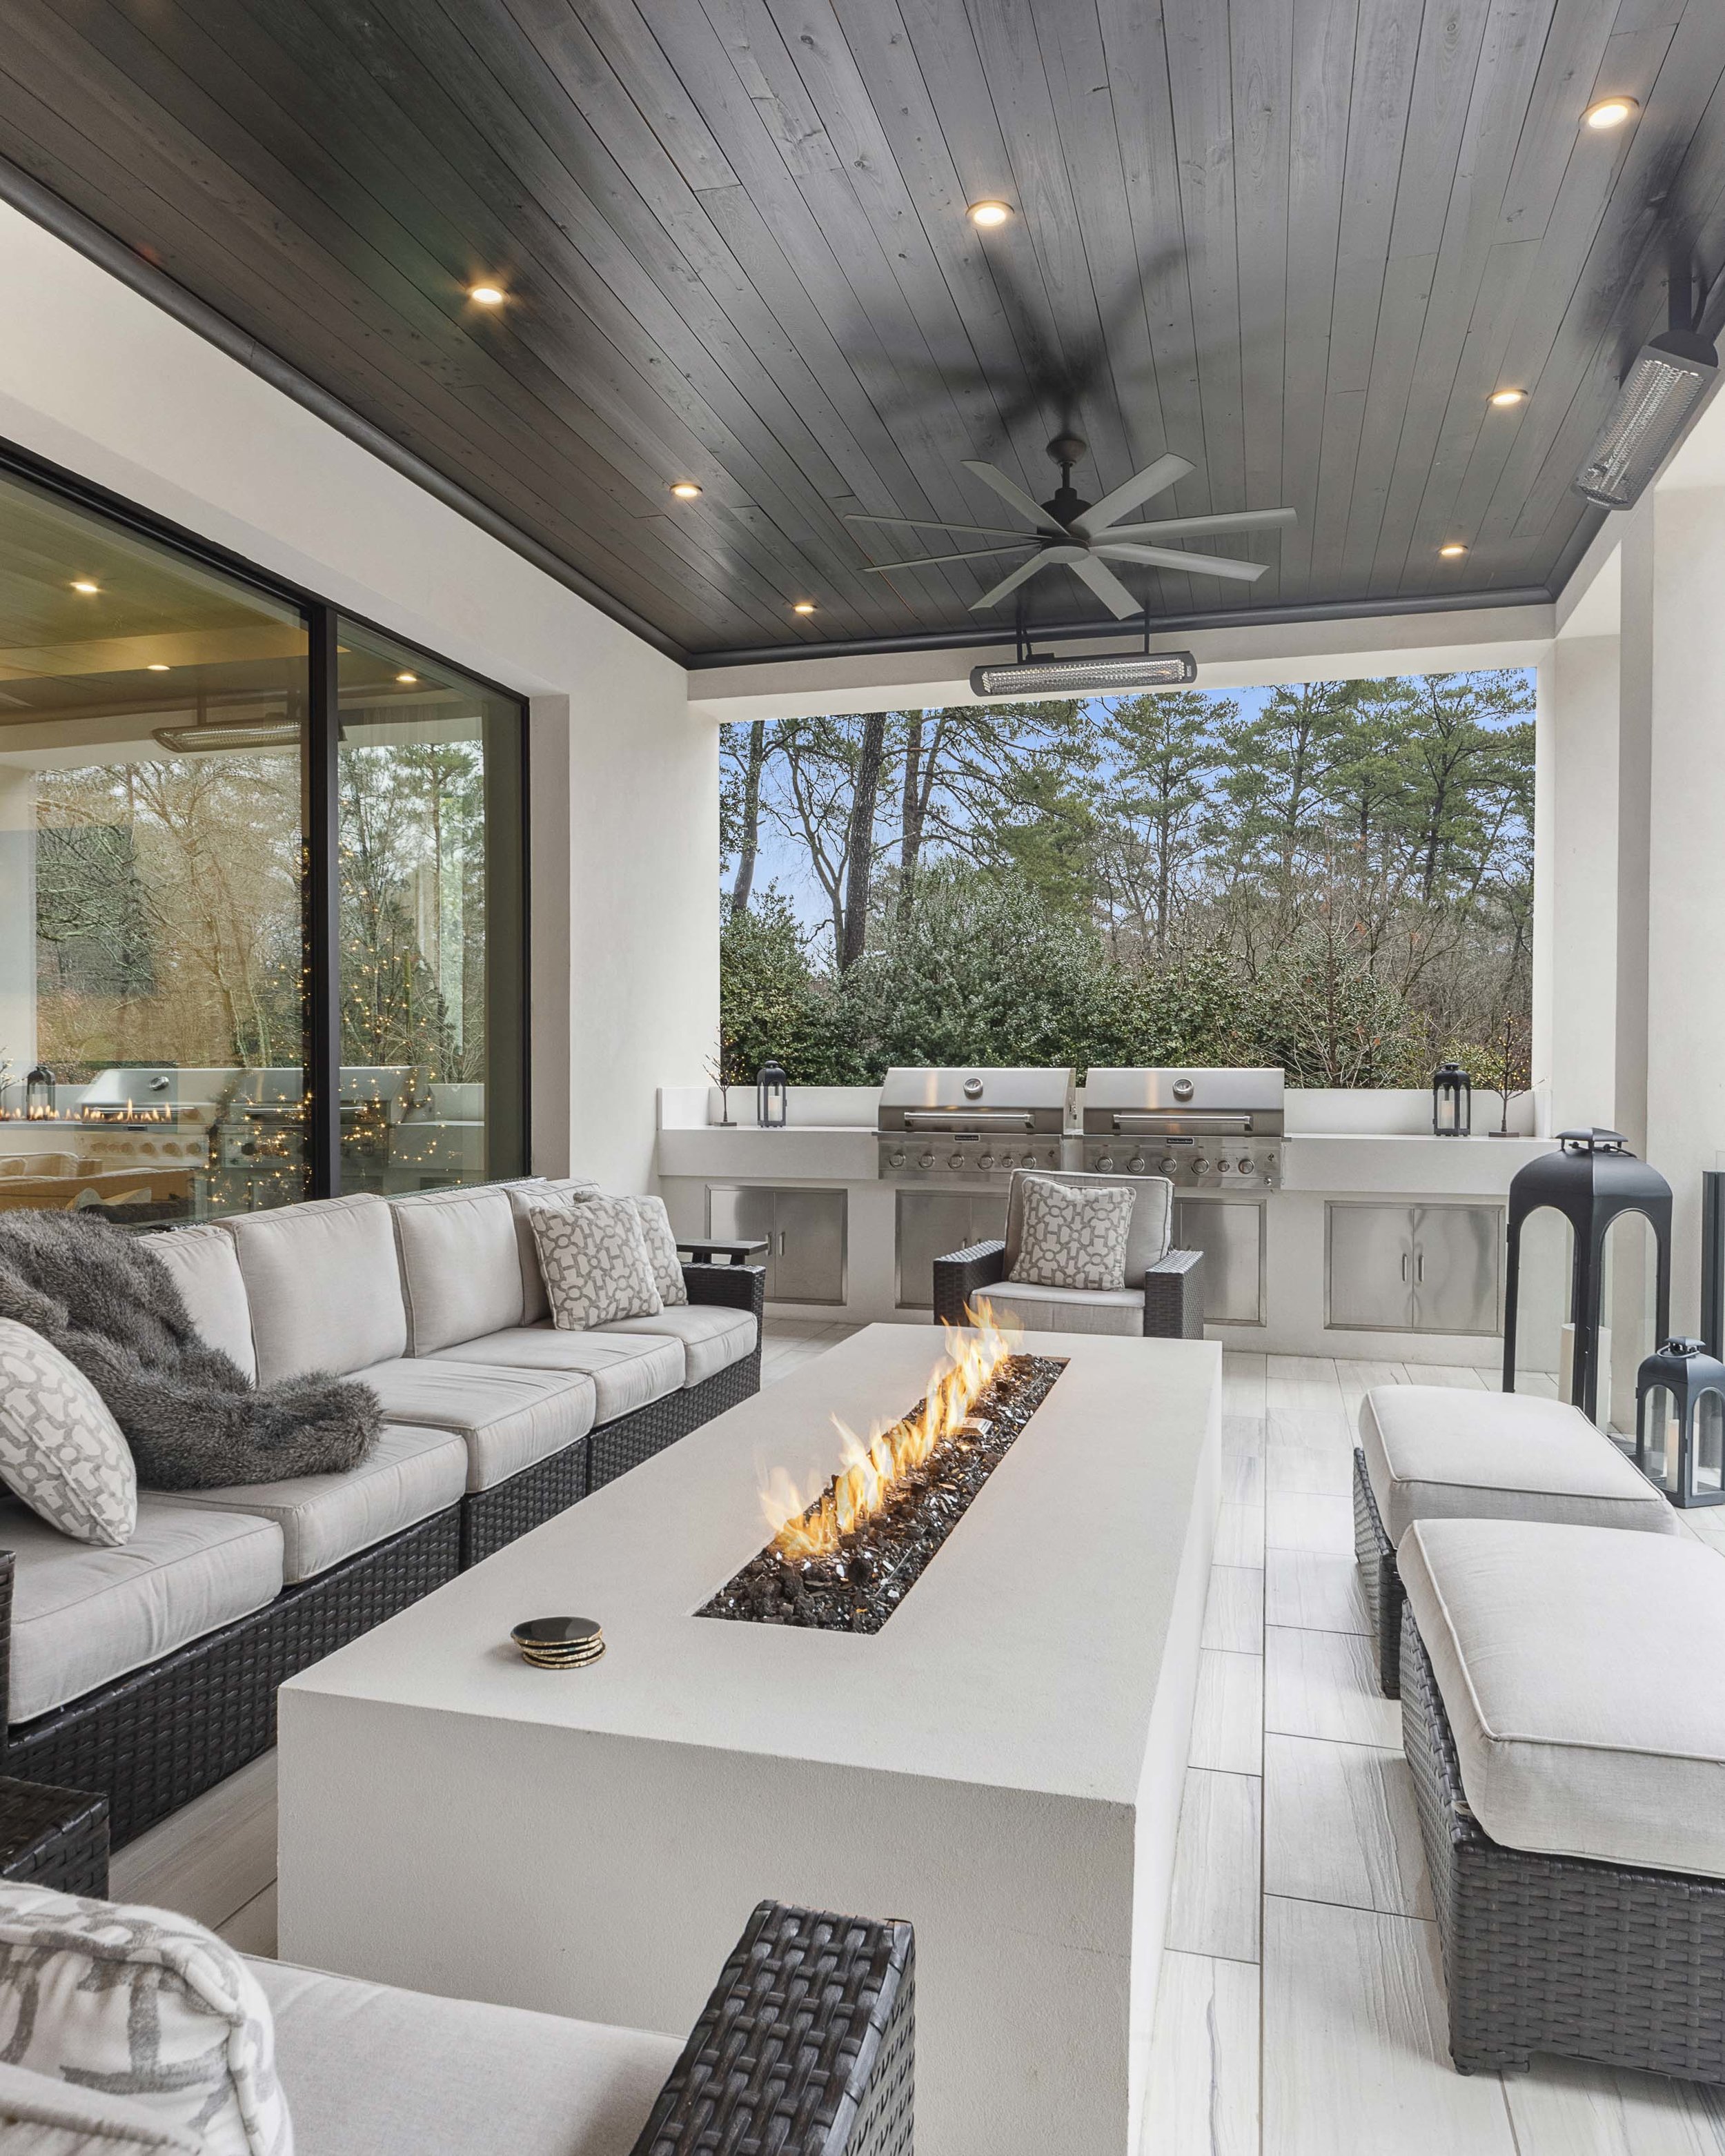 Habersham_outdoor room with built-in grill.jpg